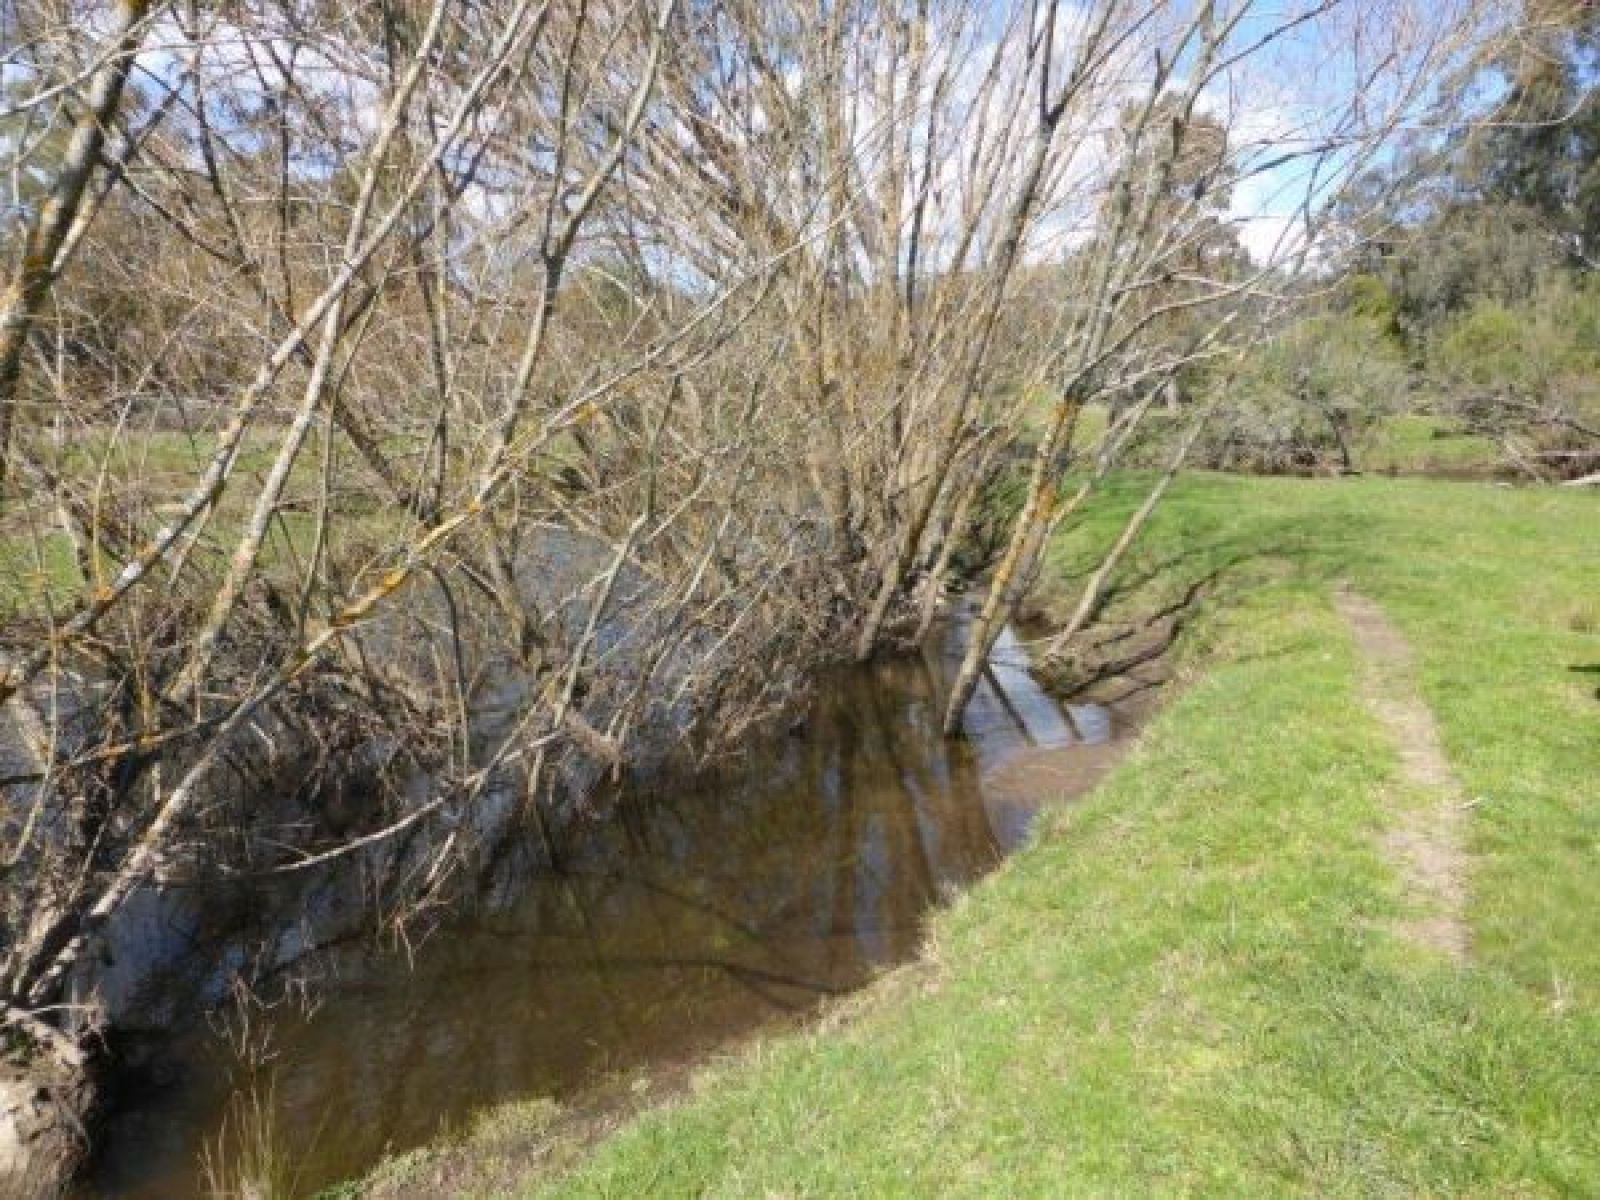 Alternative text: Rubicon River in Thornton, showing the river widening out behind the willows.